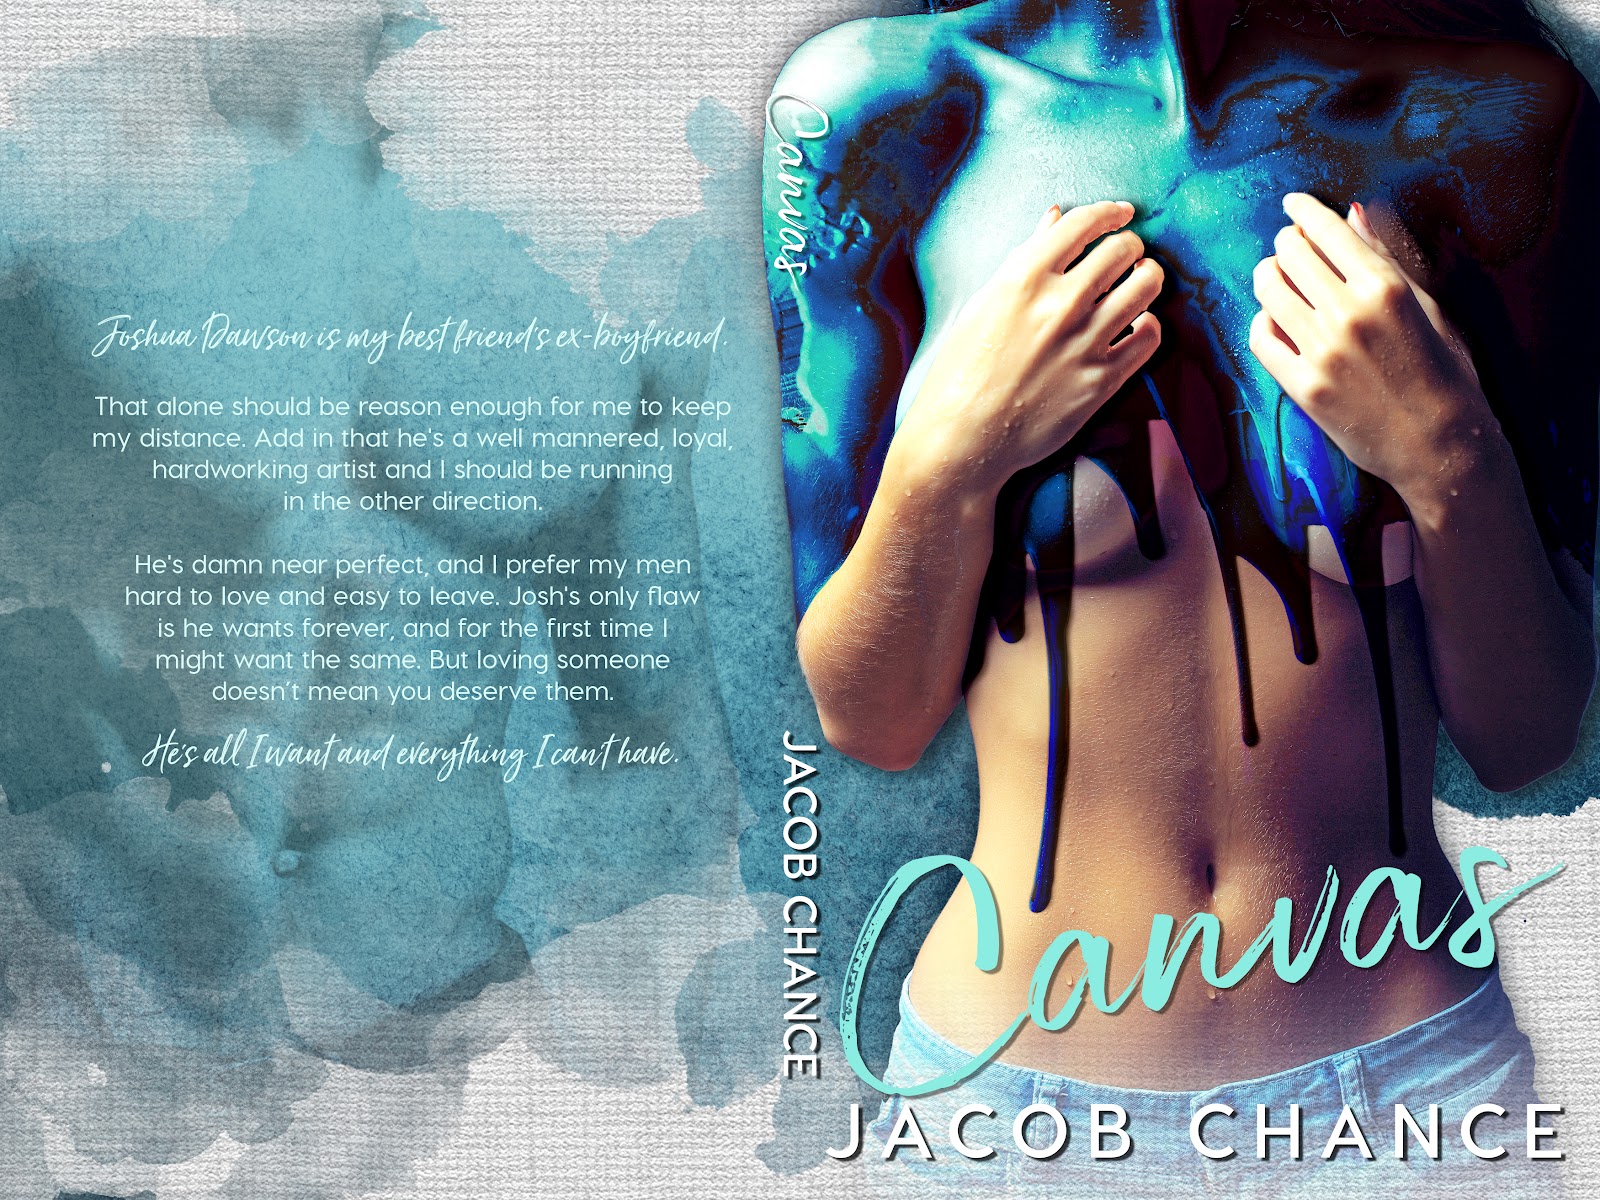 Canvas  Jacob Chance Paperback Cover FINAL.JPG